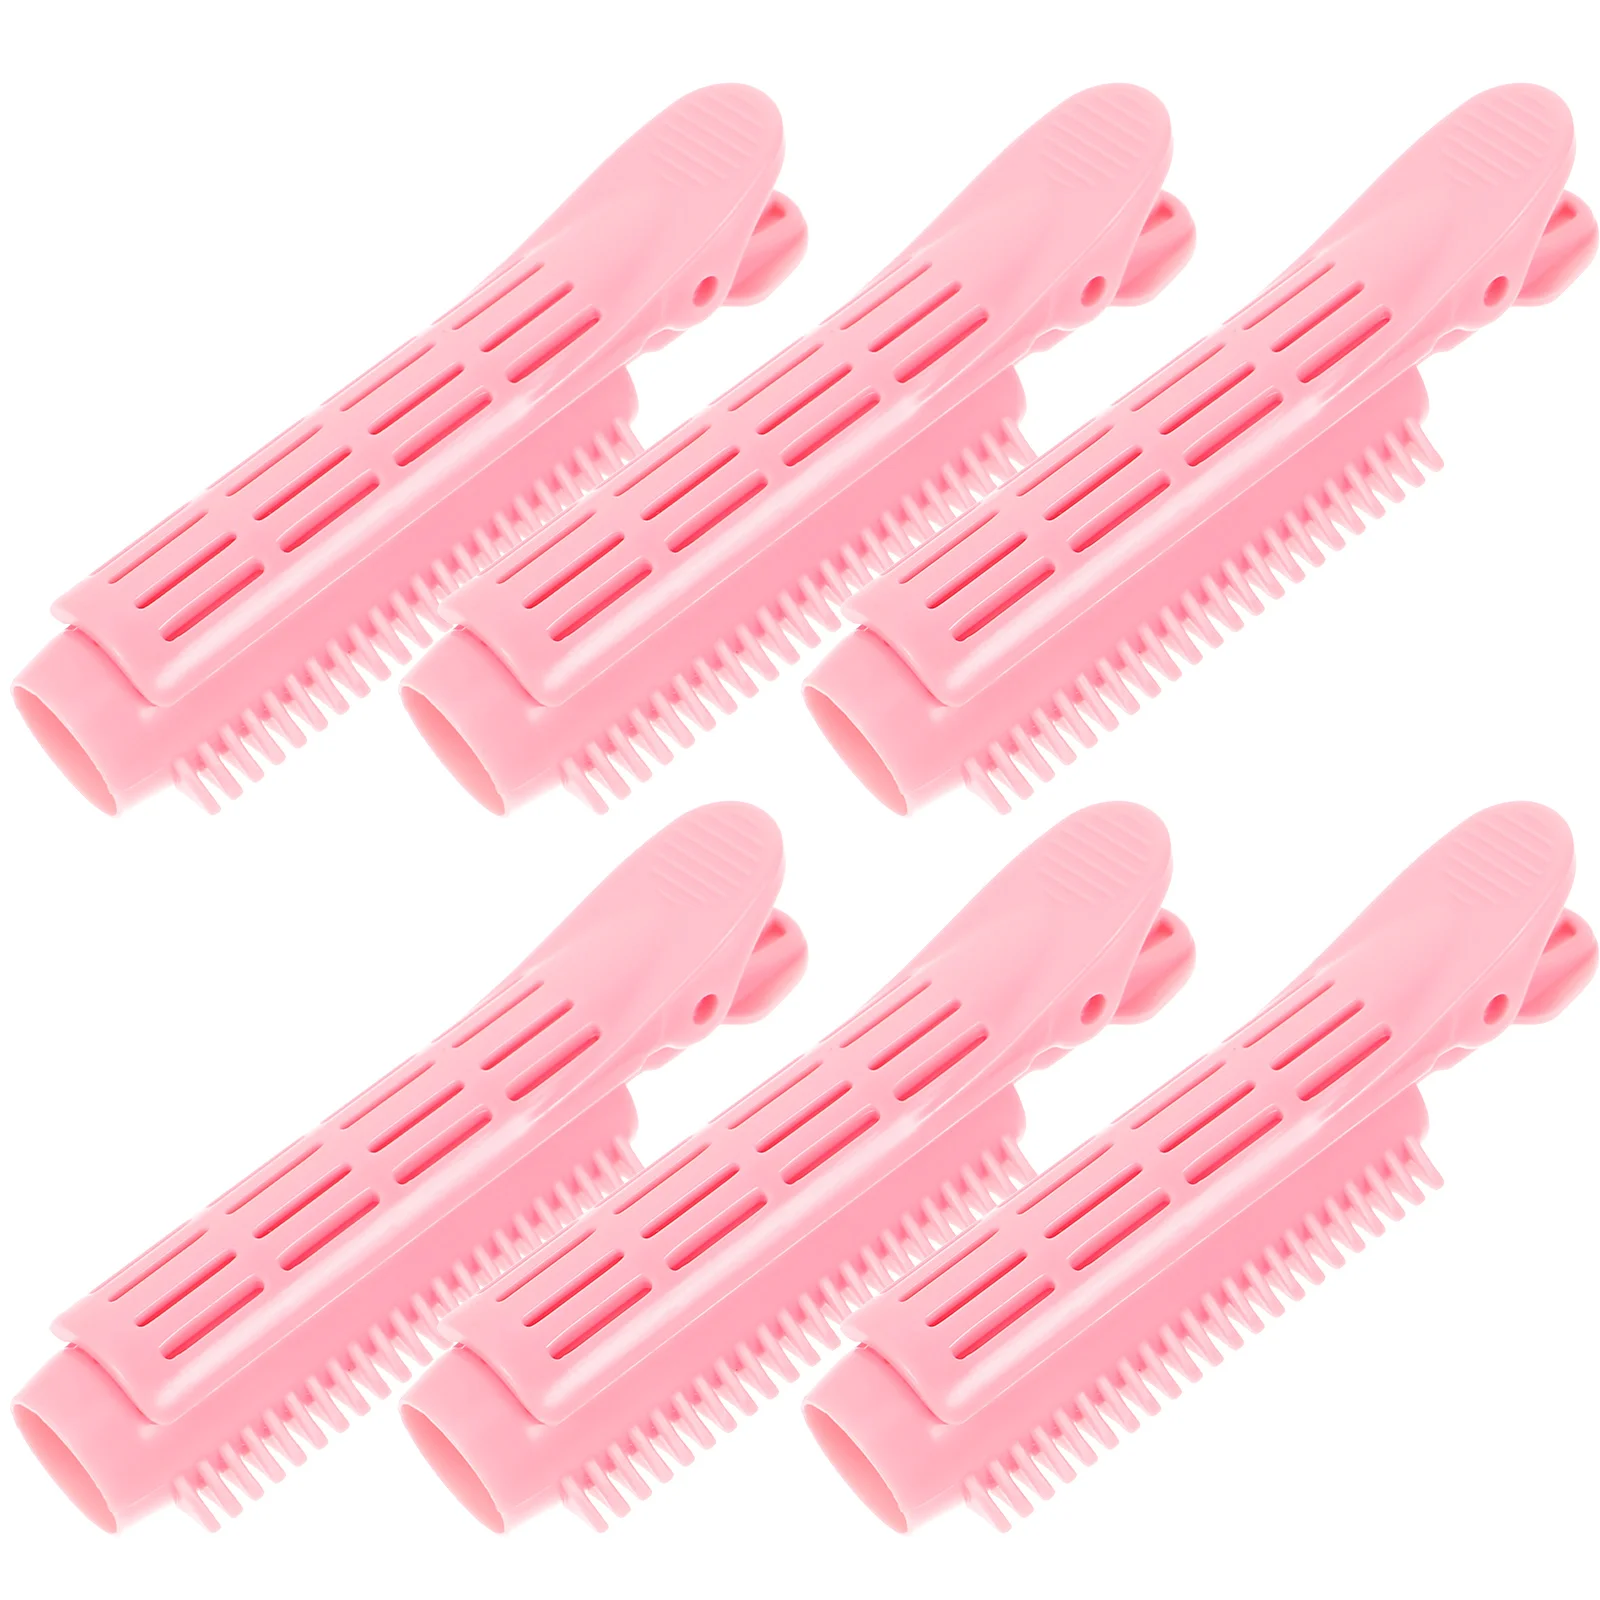 

6 Pcs Roller Clips Hair Curling Iron Fluffy Bangs Volumizing Abs Root Jaw Clamps Curly Large Rollers For Volume